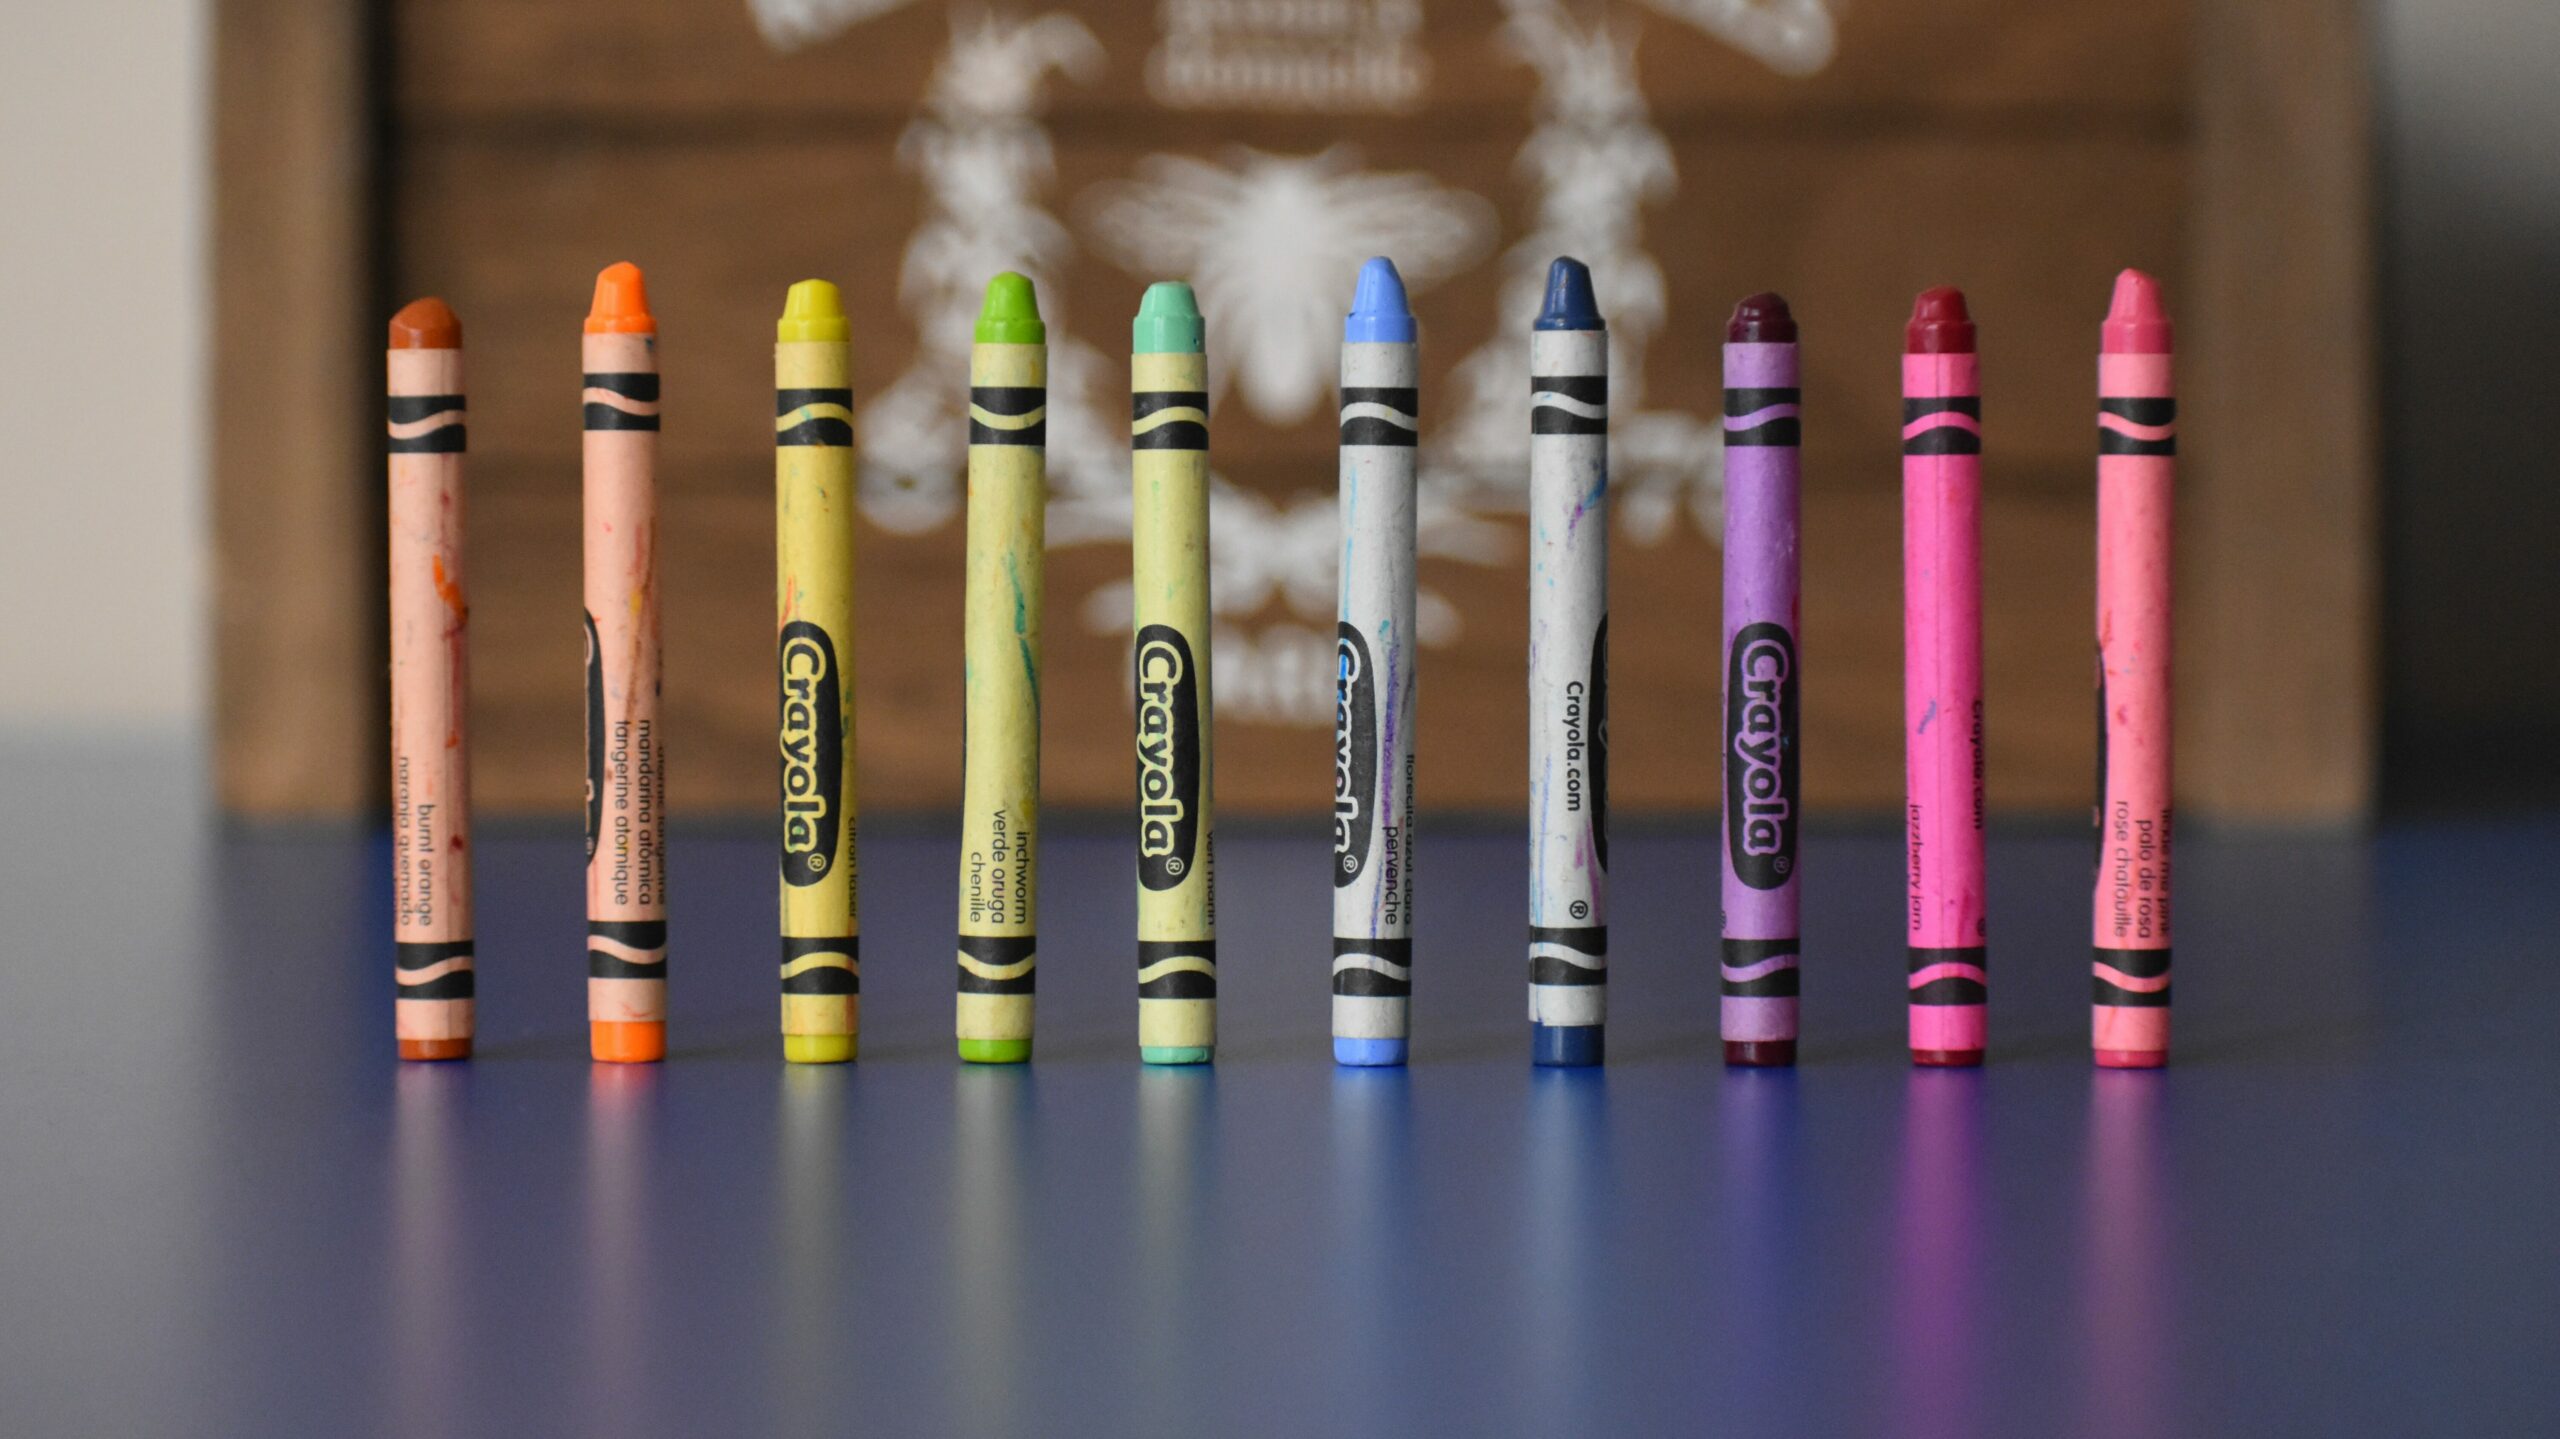 What Is The Rarest Crayon Color?